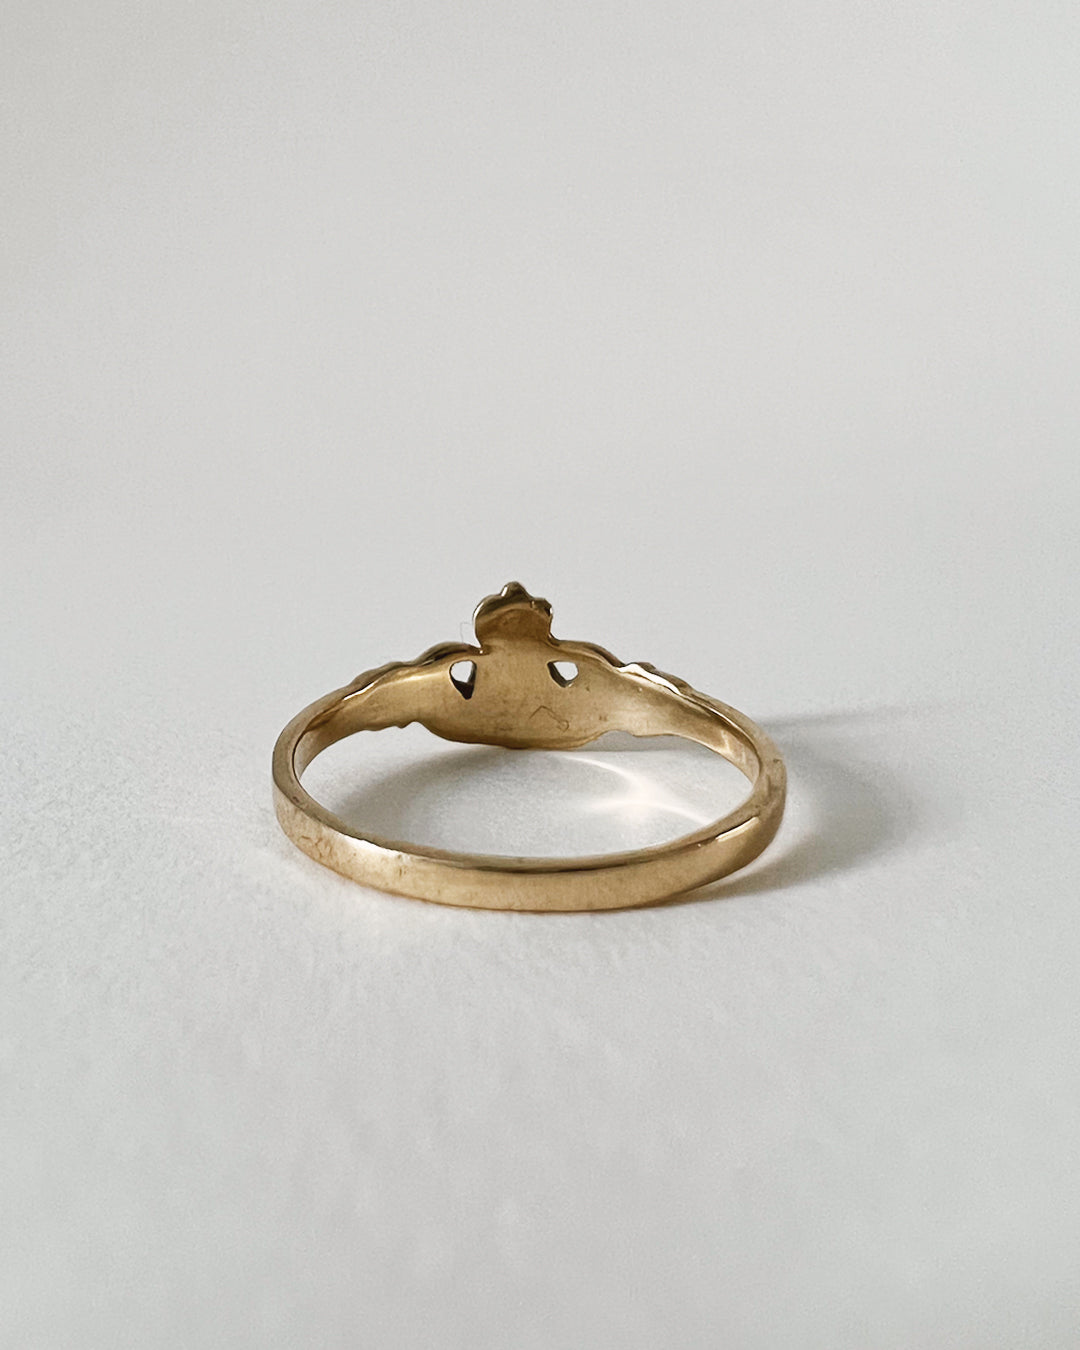 SOLID YELLOW GOLD CLADDAGH RING, 9CT GOLD RING